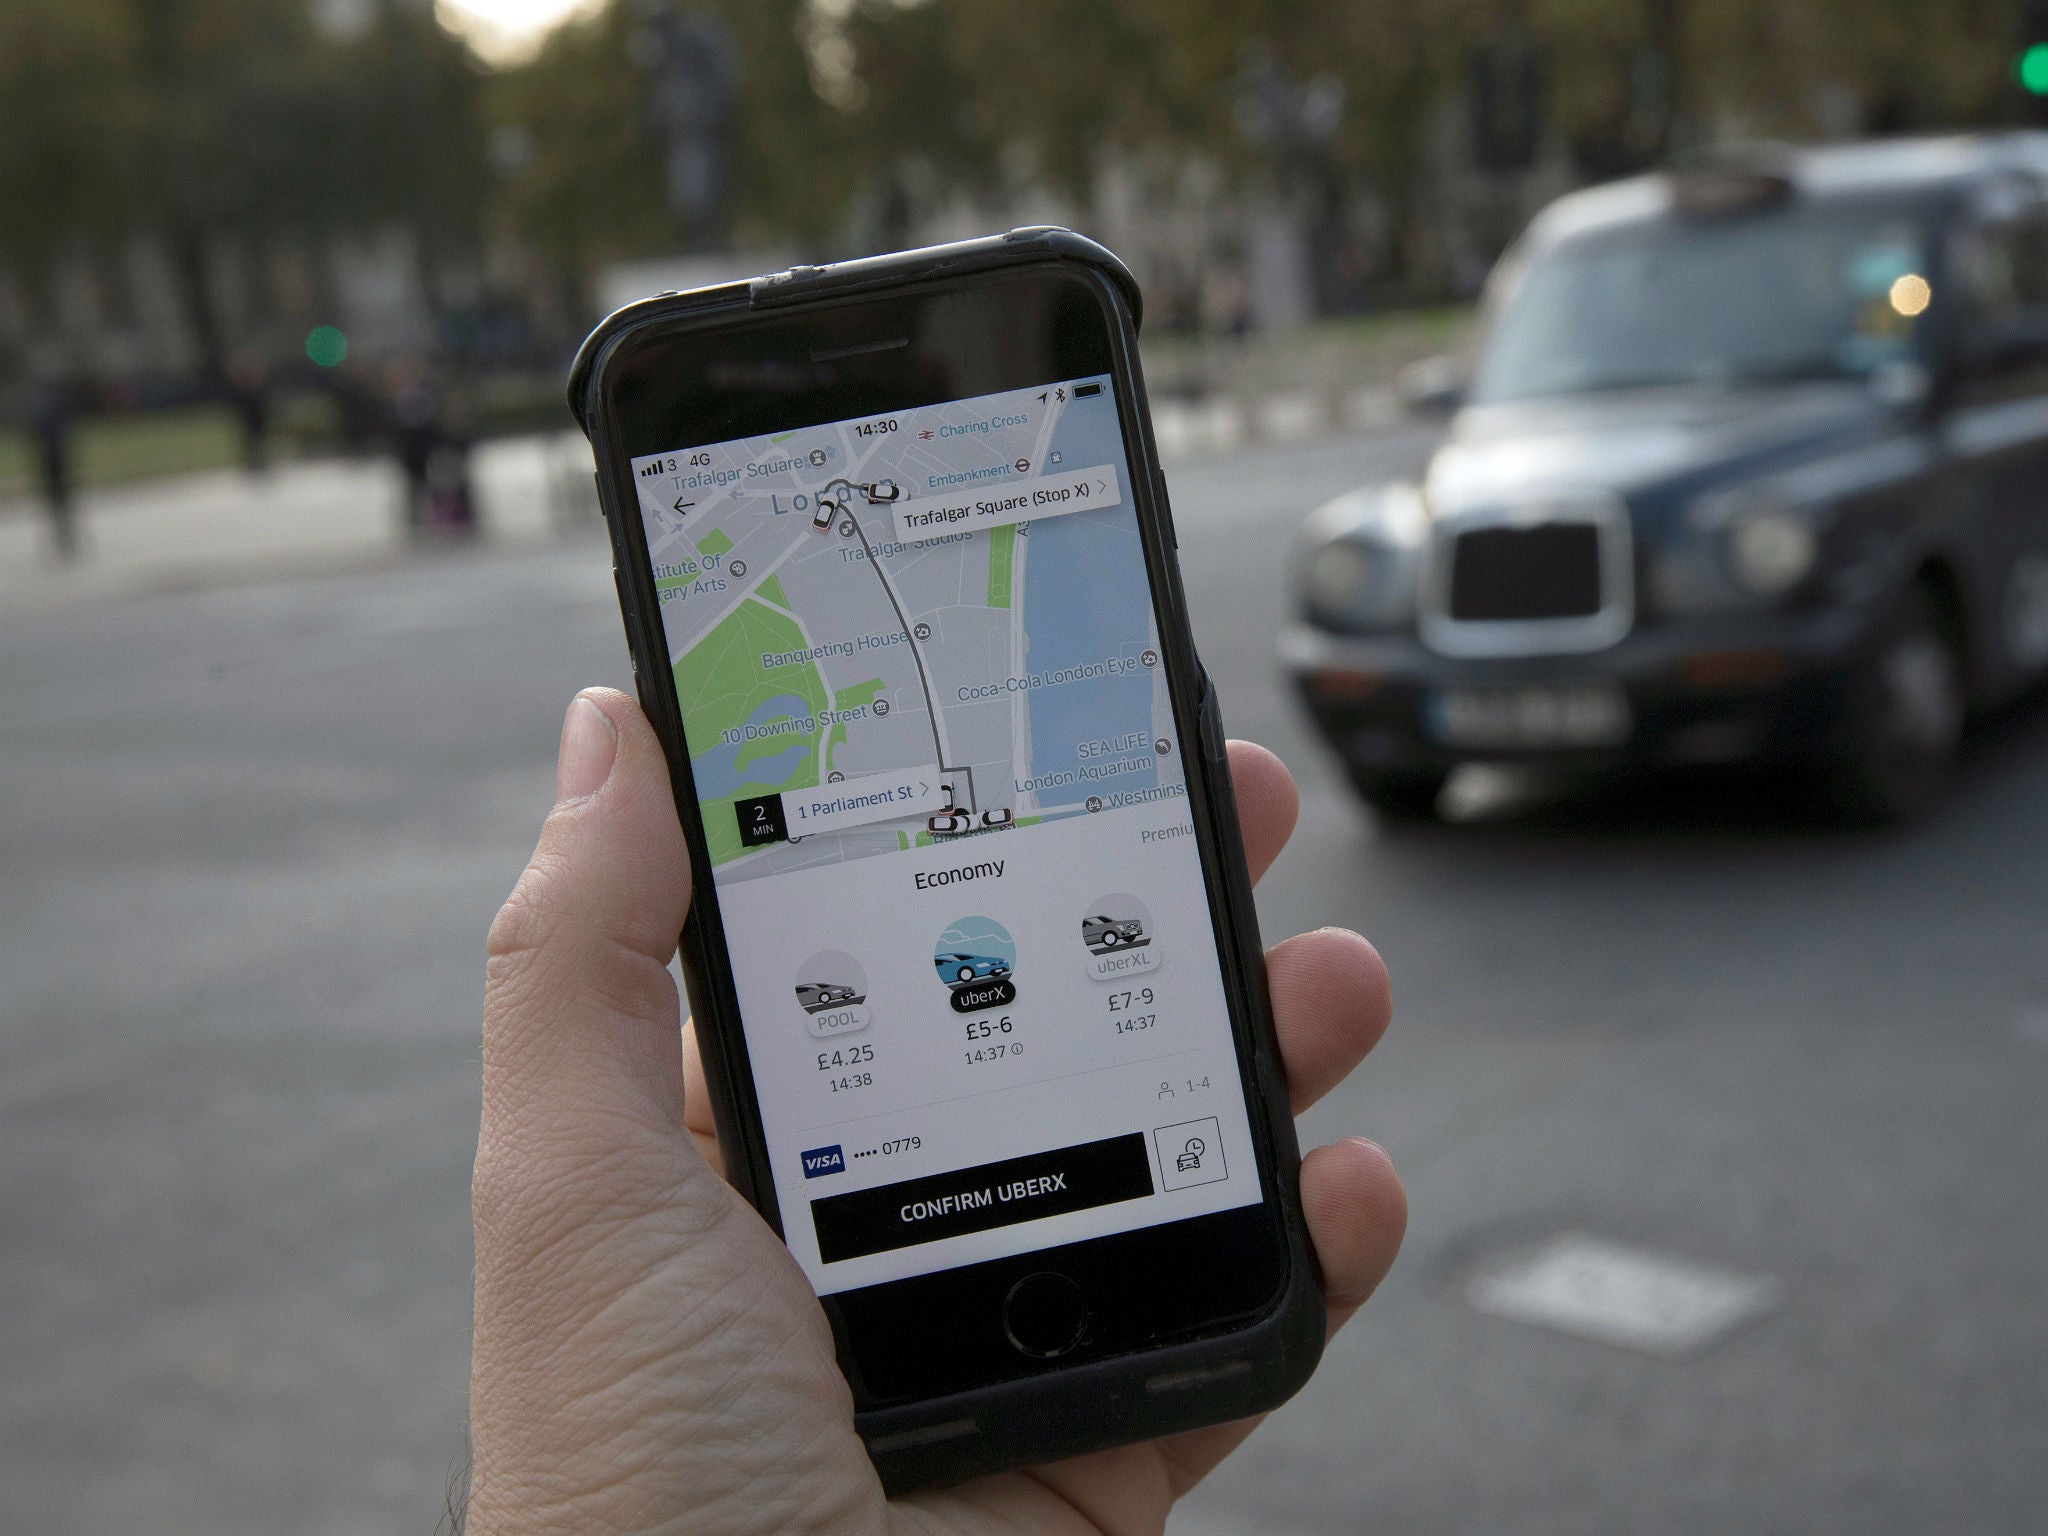 Uber is disclosing a mass security breach it says occurred over a year ago